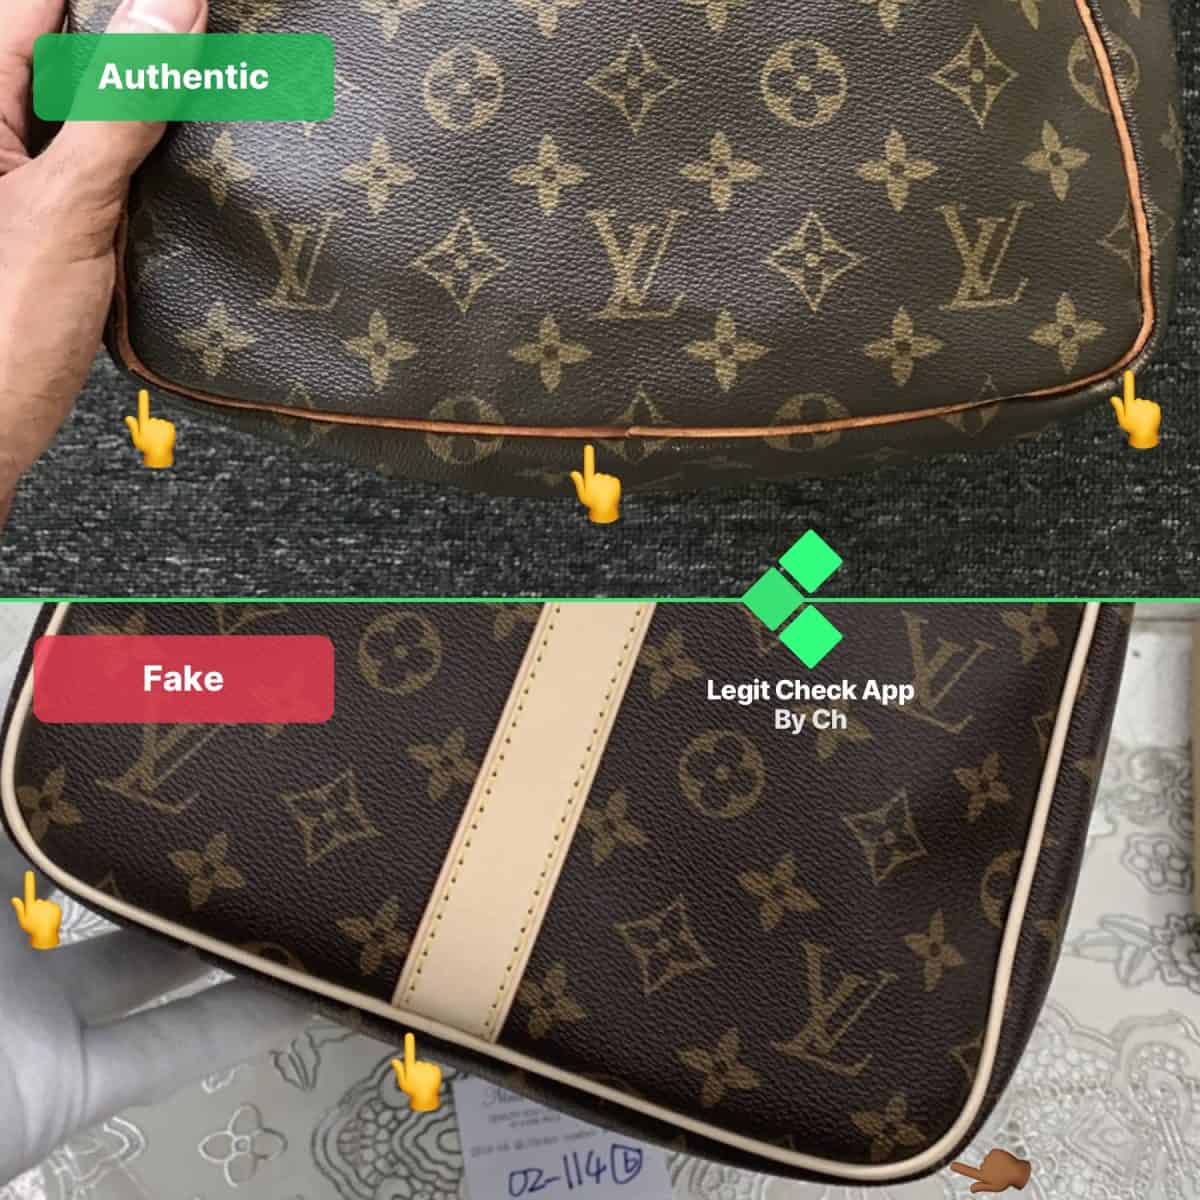 louis vuitton keepall authentication guide